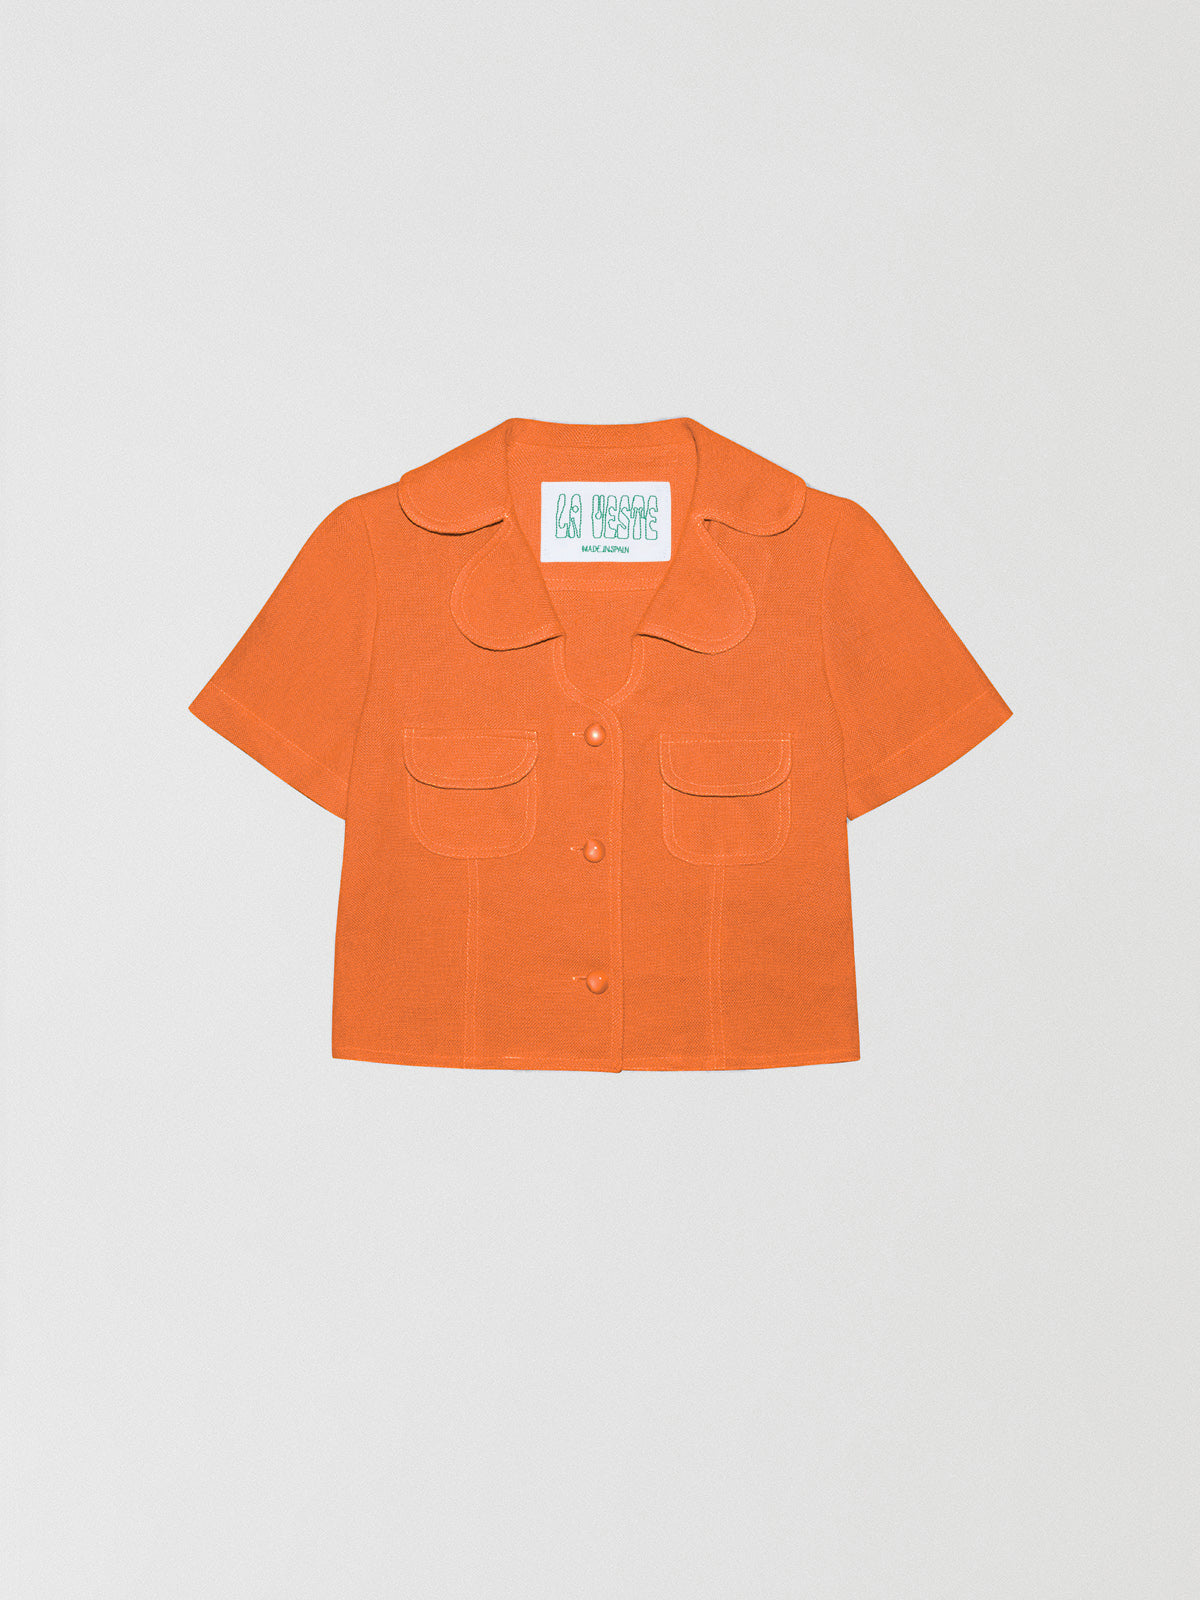 Loto Orange Shirt is a short sleeve shirt made of linen fabric, orange stitching and front buttons.